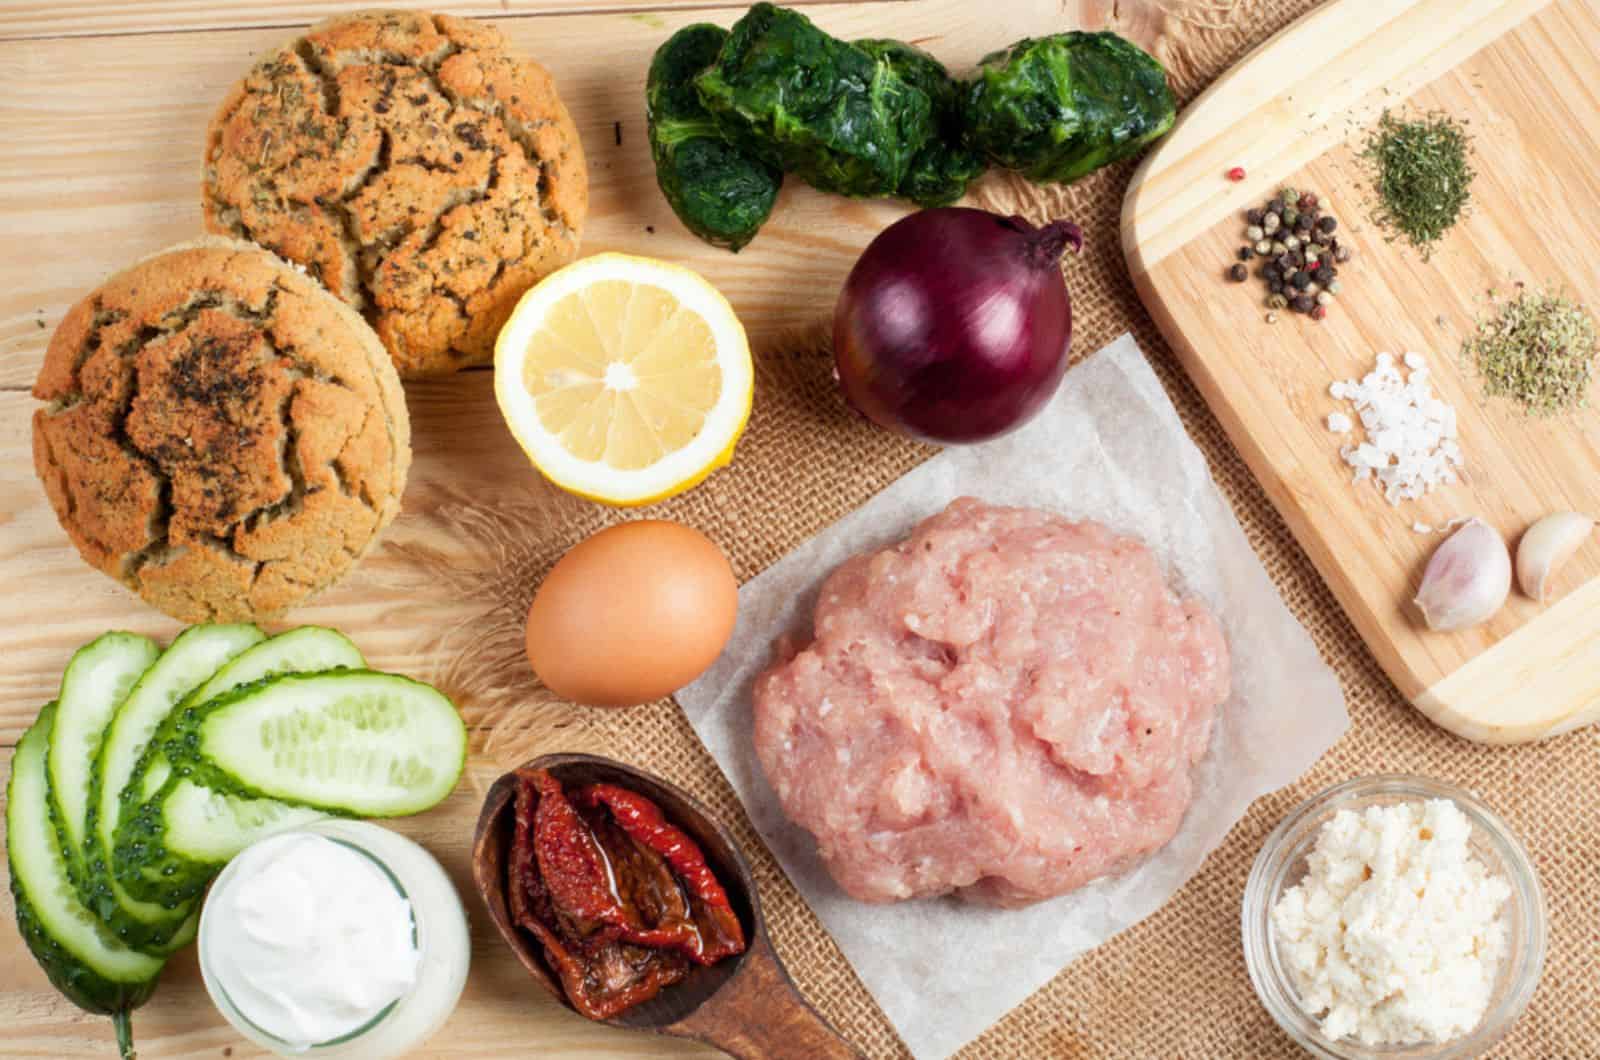 Ground turkey or chicken with ingredients and spices on wooden table